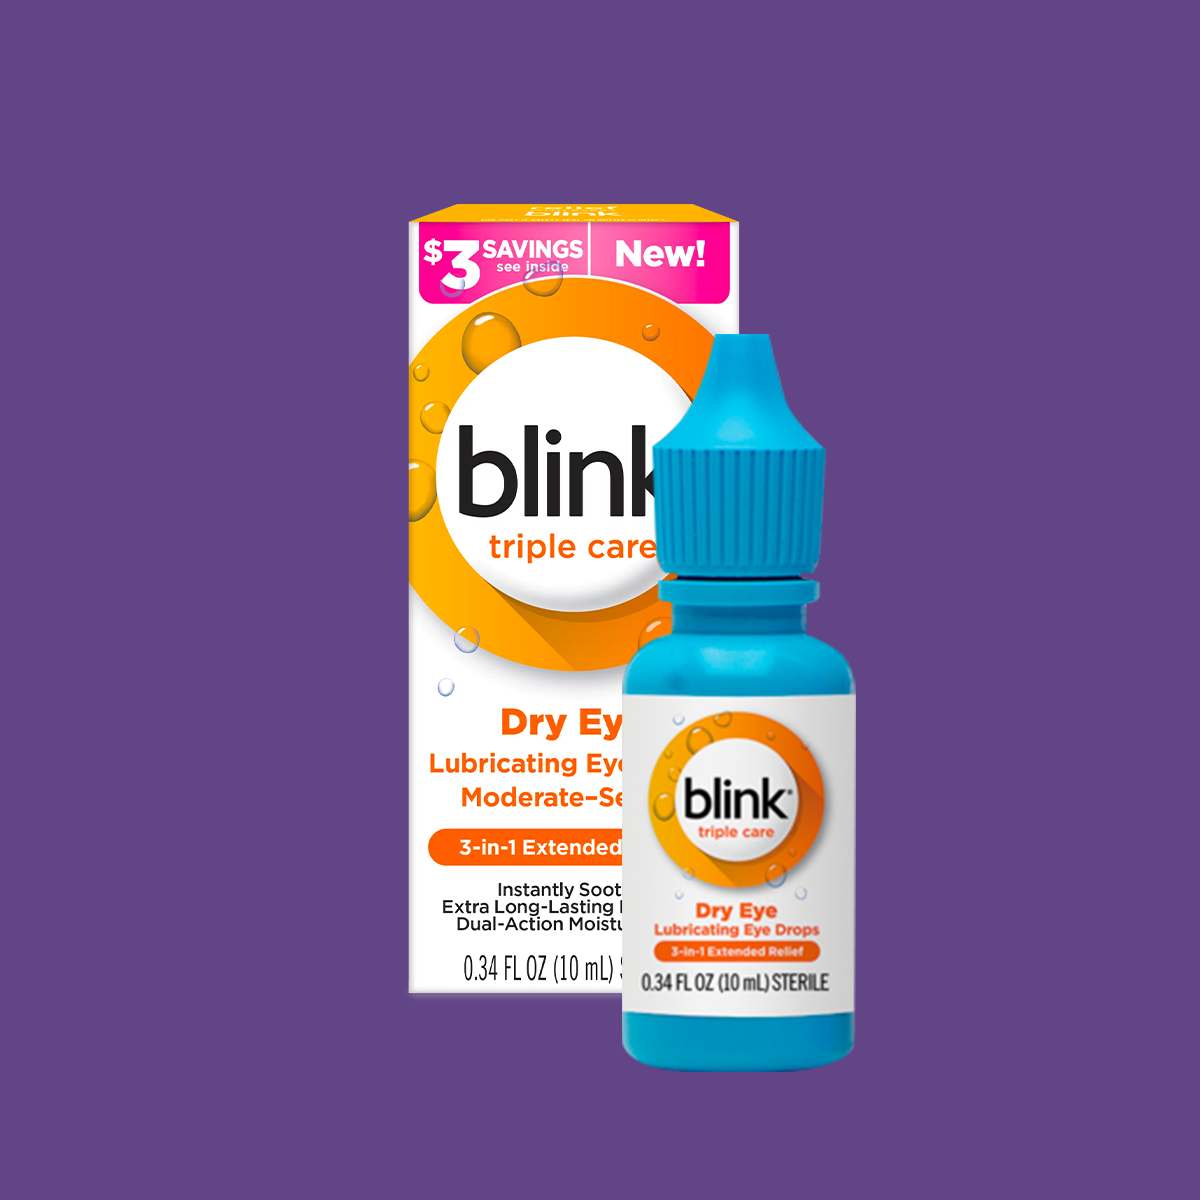 Blink Triple Care 3 in 1 Eye drops for Moderate to Severe Dry Eye